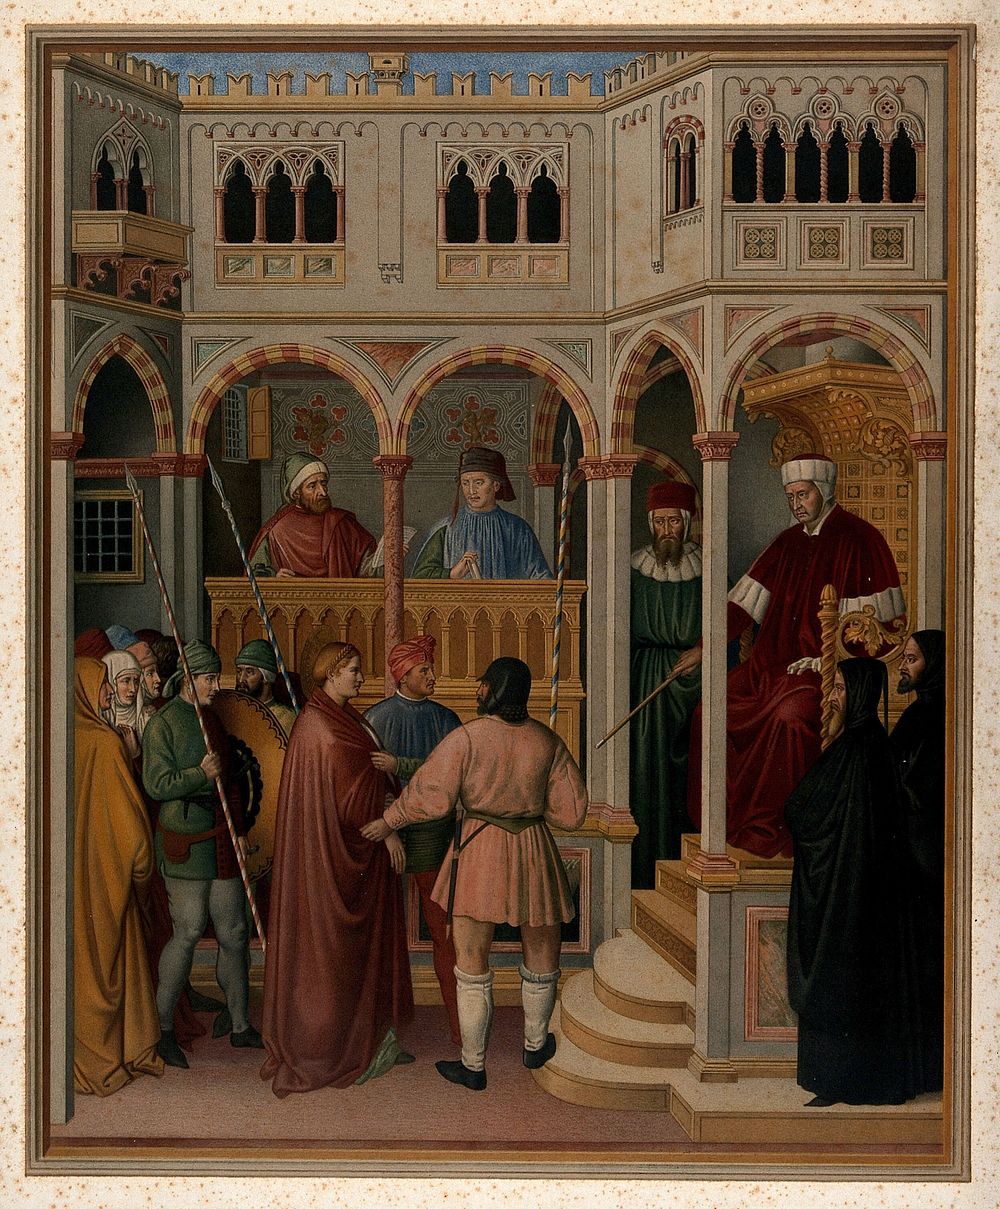 Saint Lucy sentenced to death by the Roman praetor. Chromolithograph by L. Gruner after E. Kaiser after Jacopo Avanzo.